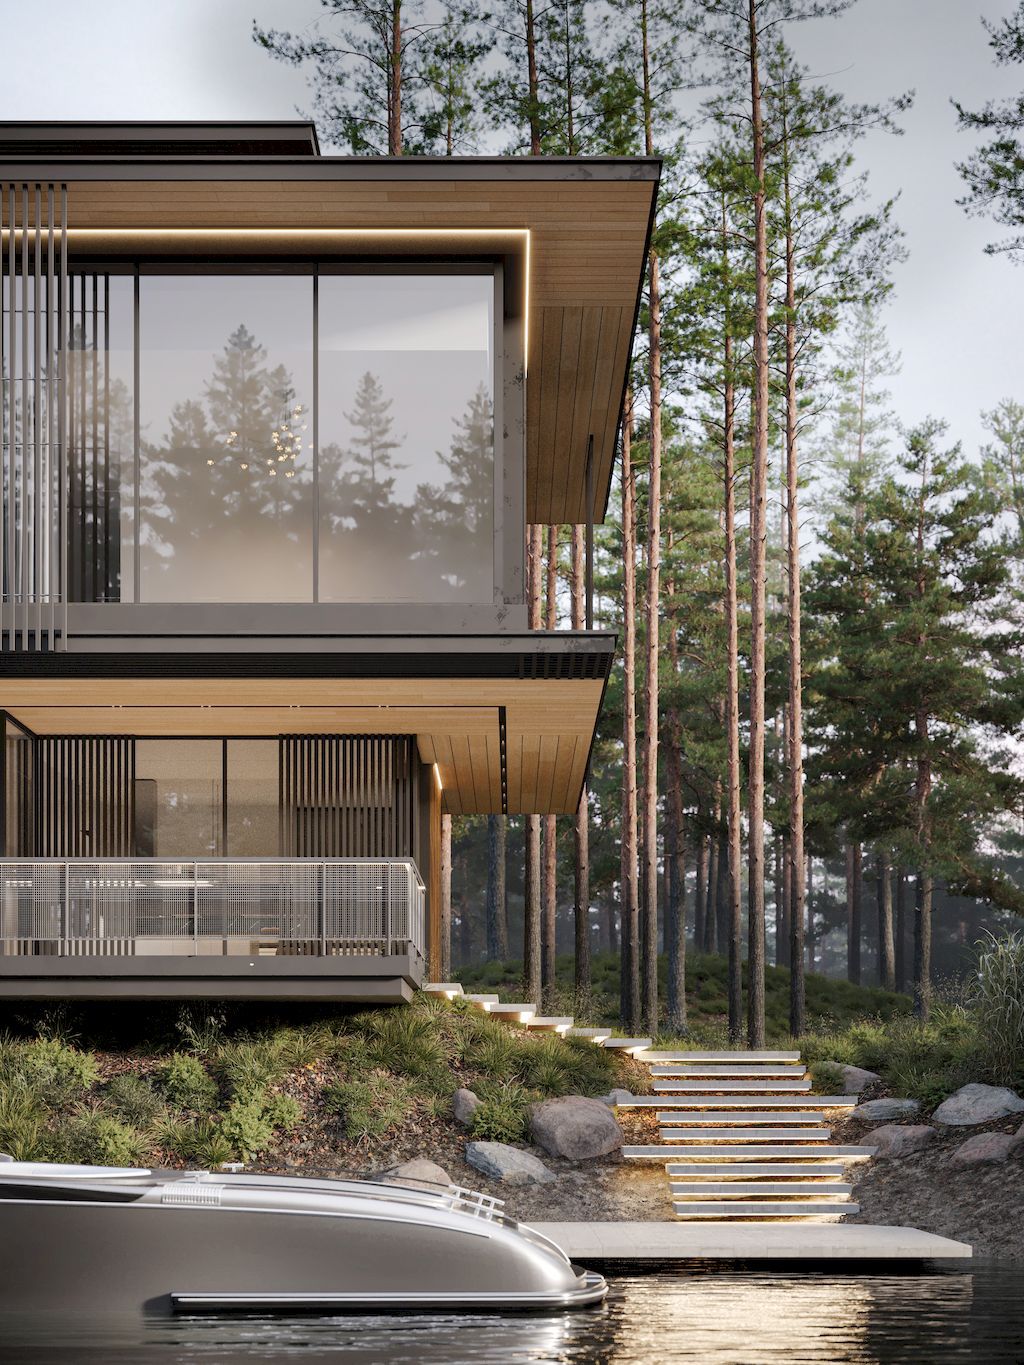 Three Elements House, A Compact Middle-rise Villa by Kerimov Architects